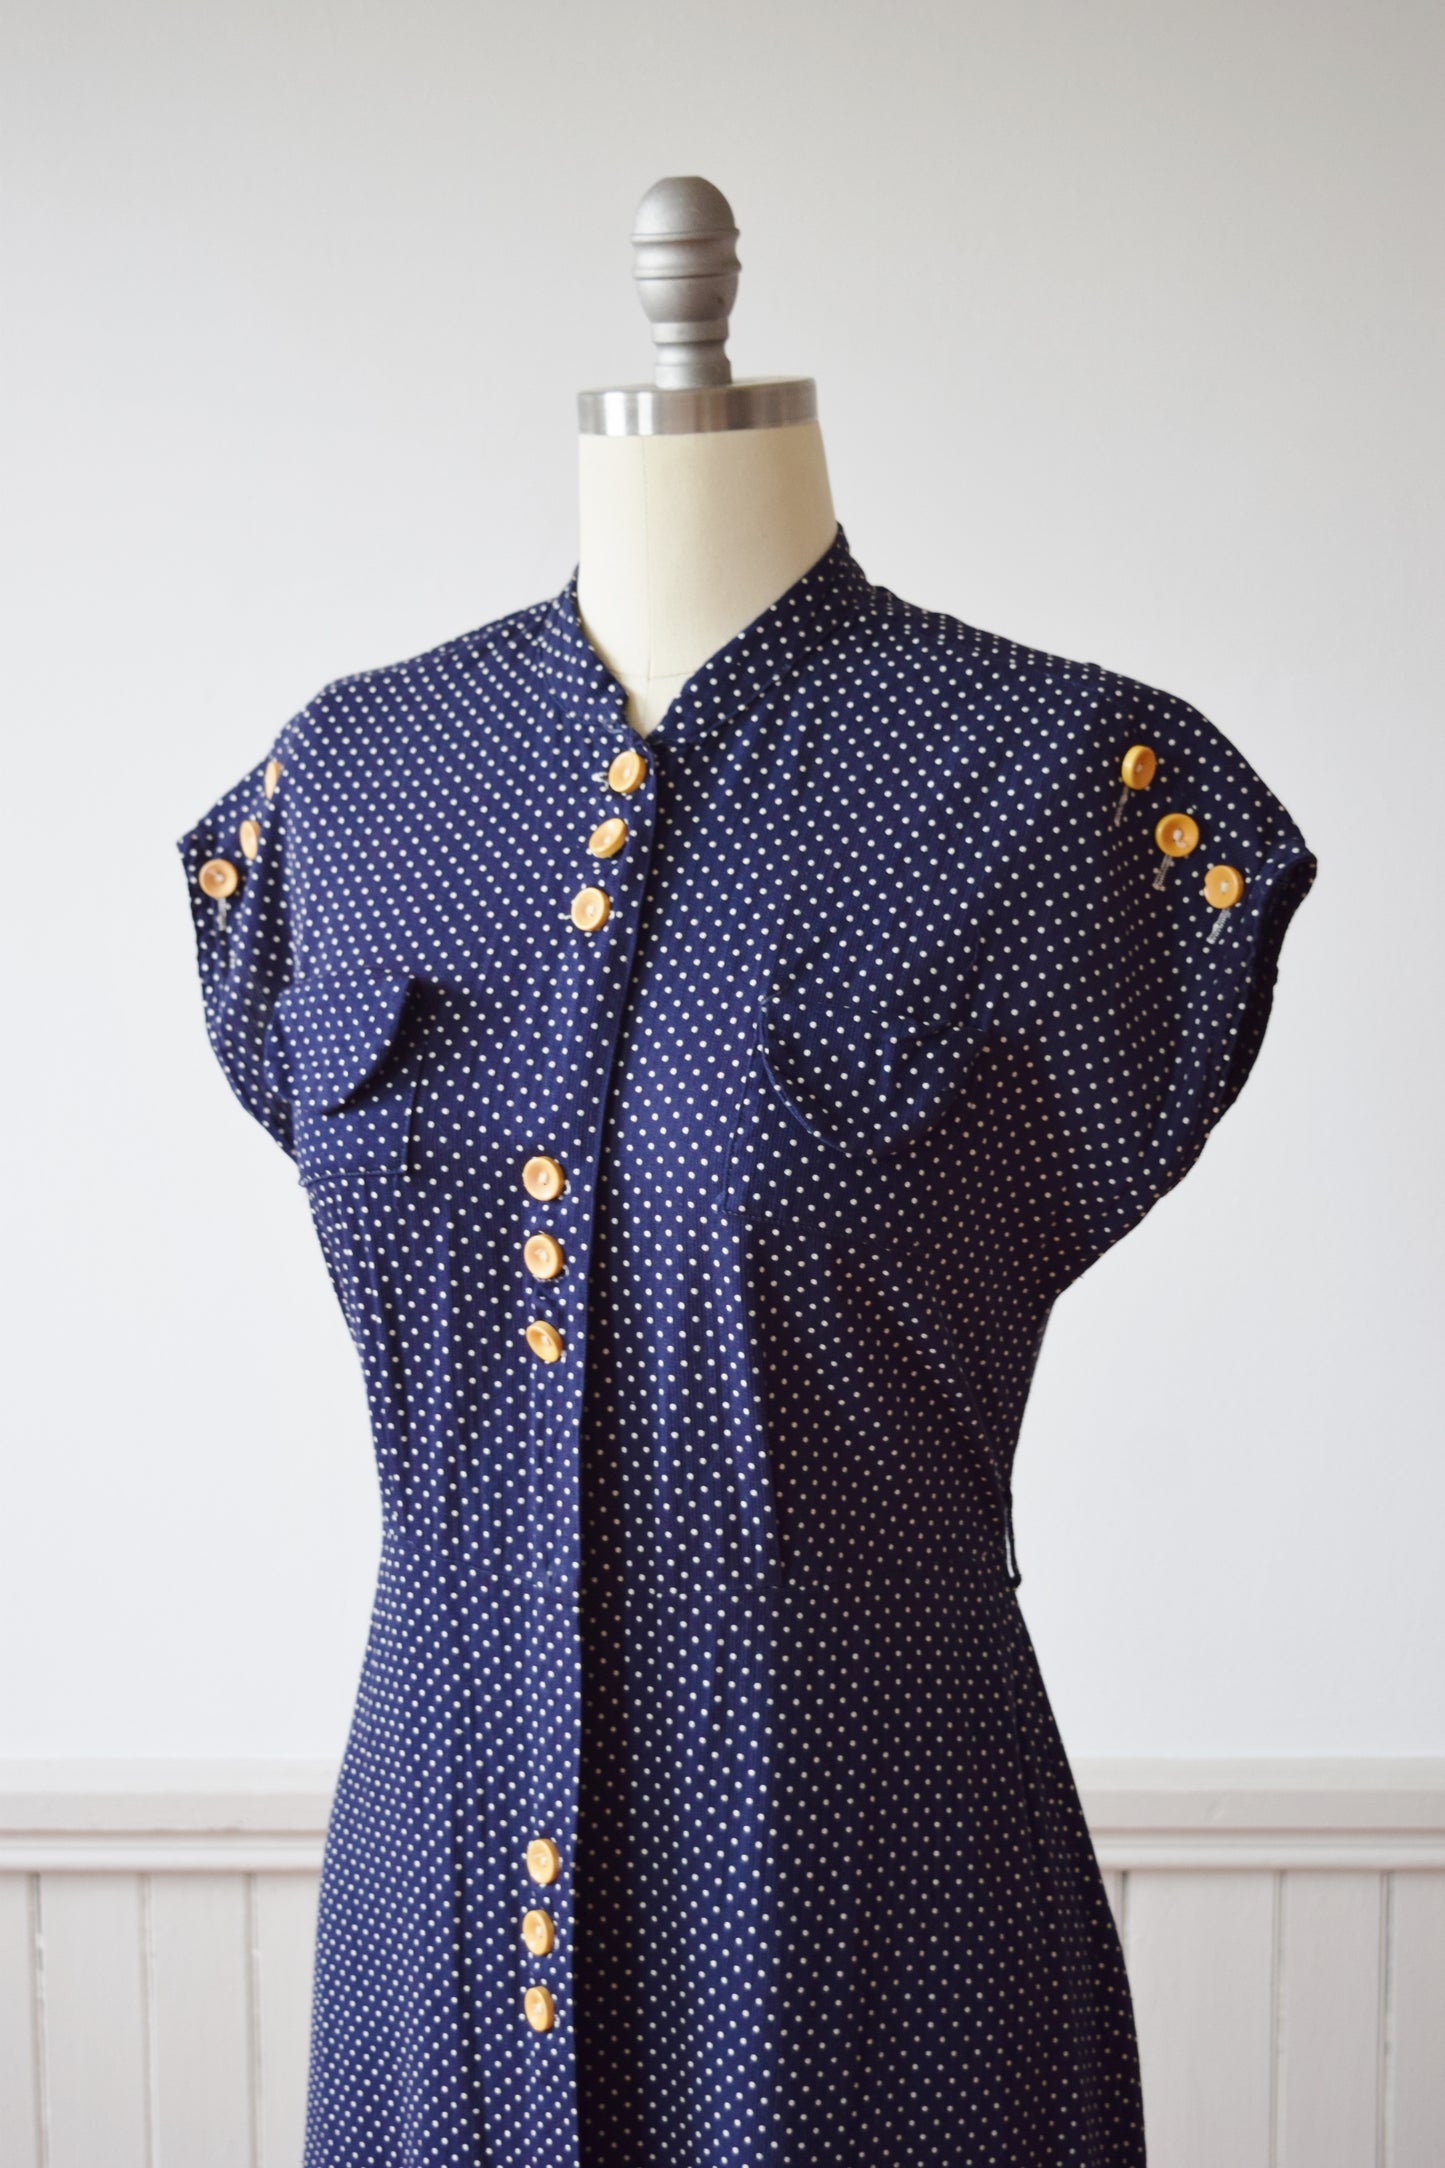 Dotted Day Dress with Bakelite Buttons | 1930s | M